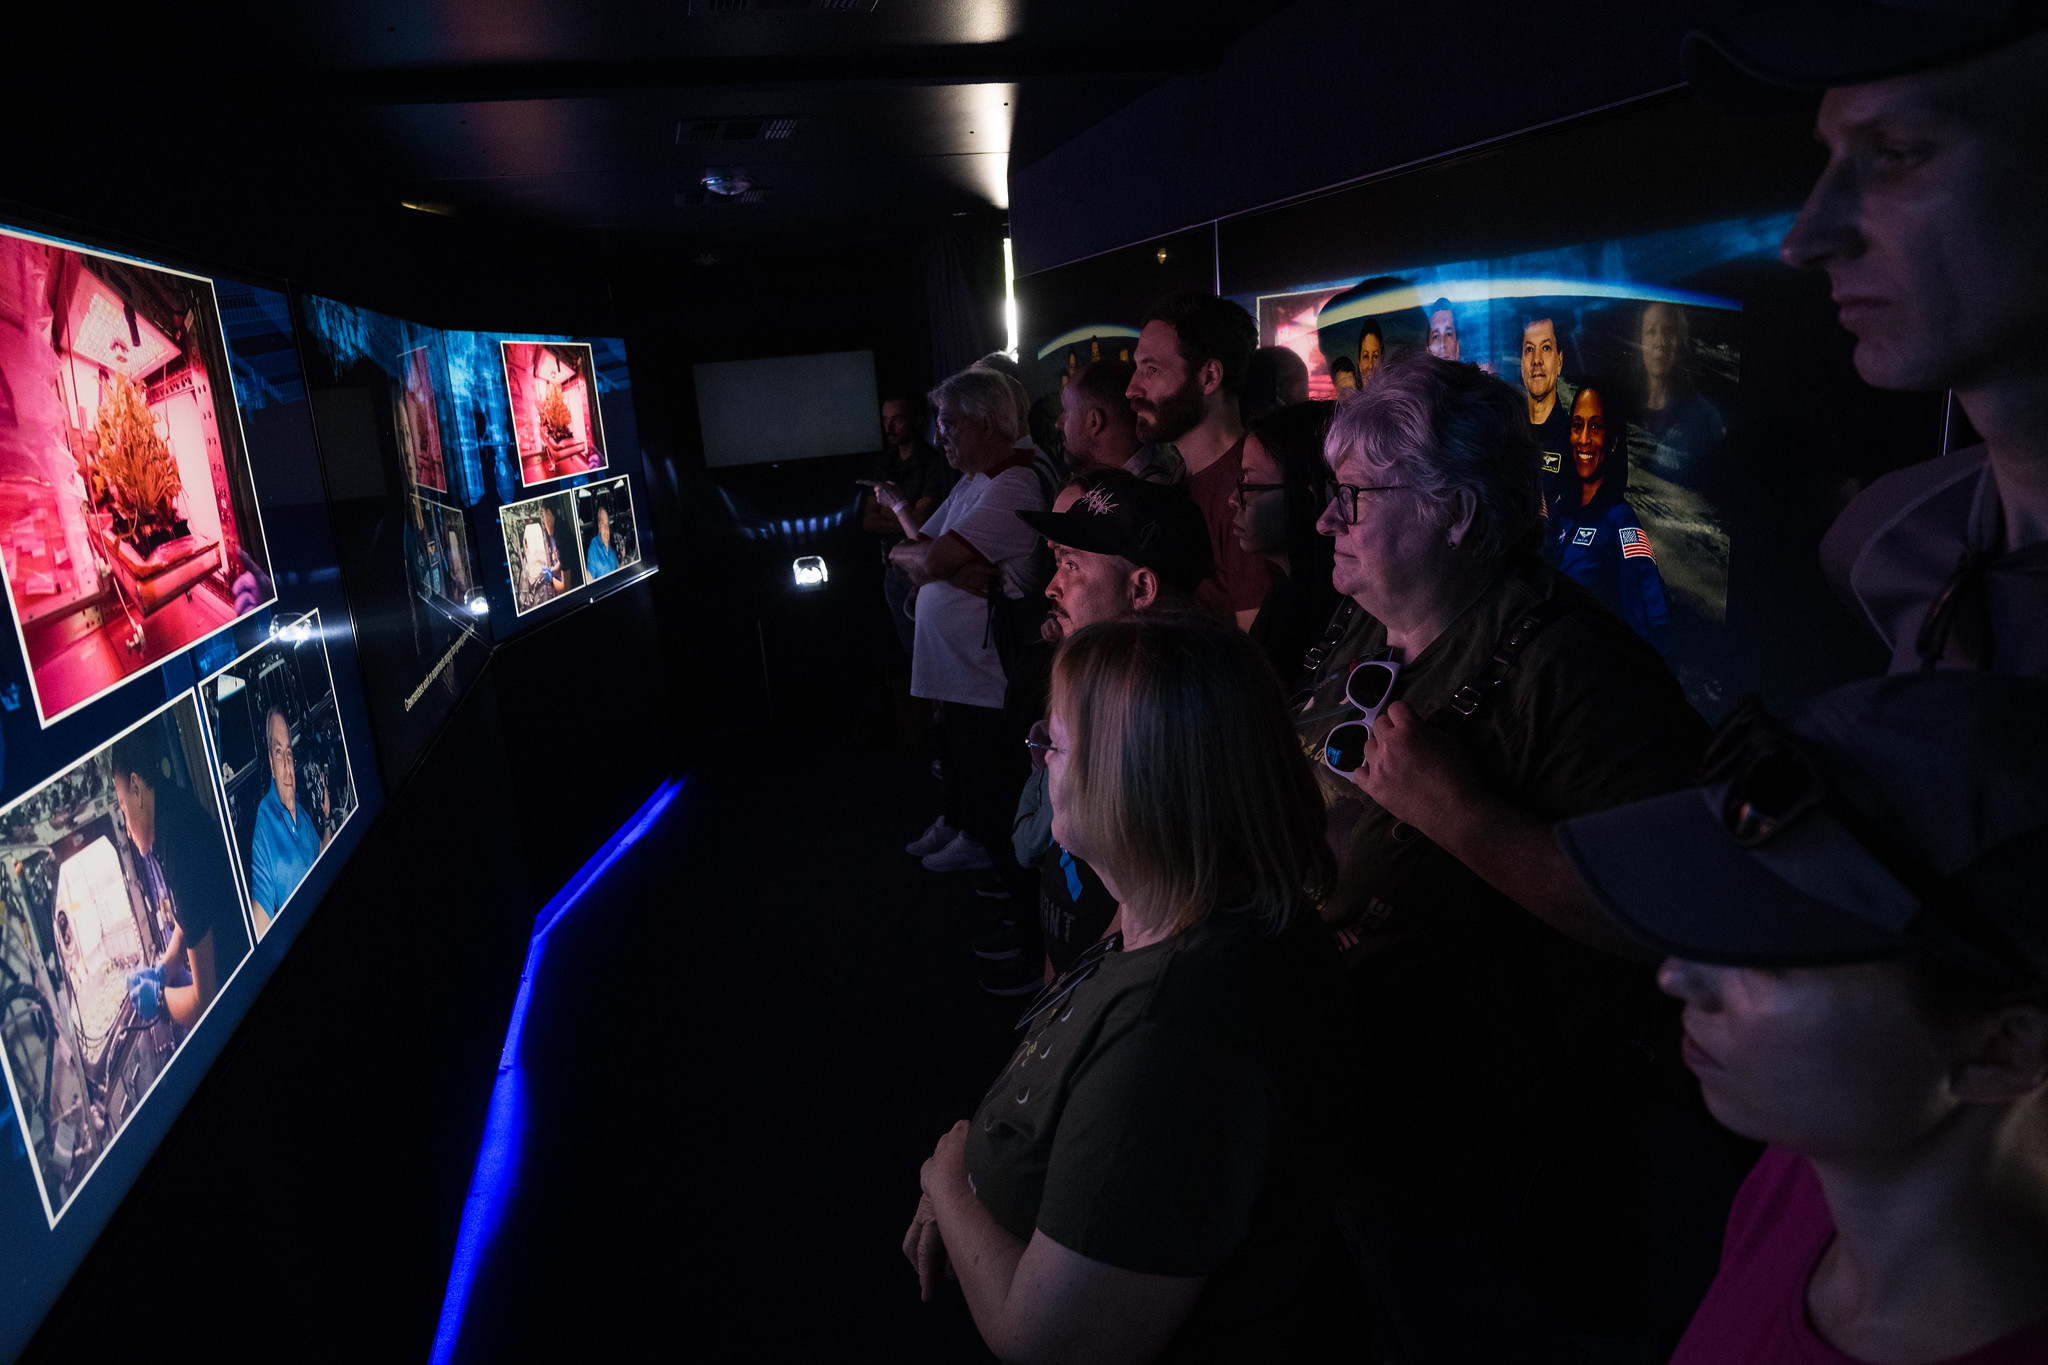 In a darkened room, several people stand in front of a collection of screens. The screens show images of the inside of the International Space Station. The light from the screens is reflecting off the visitors' faces.